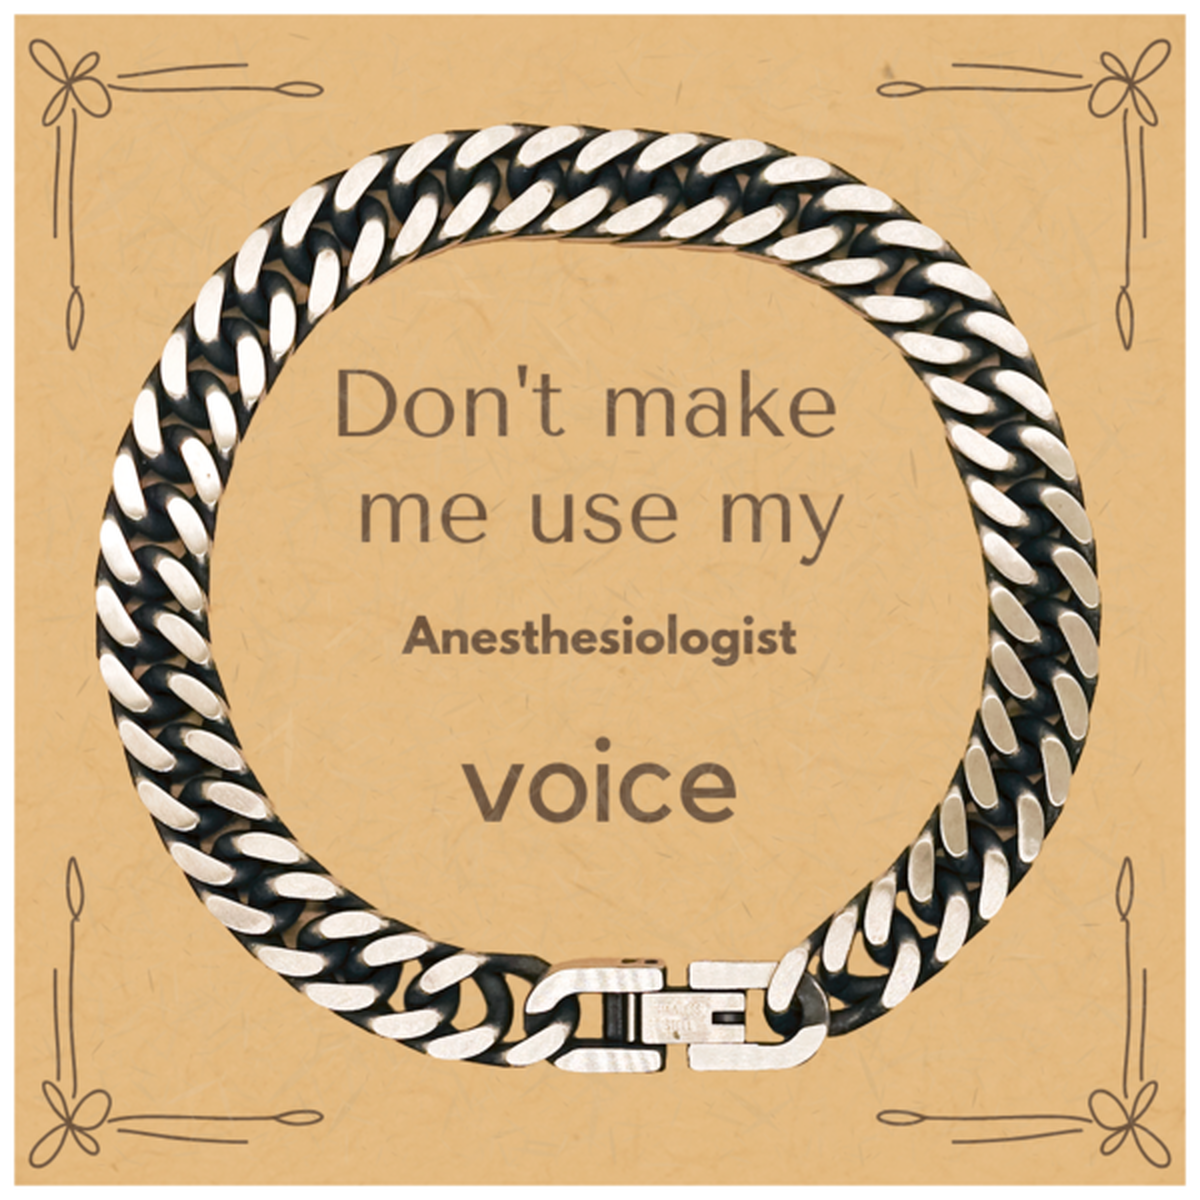 Don't make me use my Anesthesiologist voice, Sarcasm Anesthesiologist Card Gifts, Christmas Anesthesiologist Cuban Link Chain Bracelet Birthday Unique Gifts For Anesthesiologist Coworkers, Men, Women, Colleague, Friends